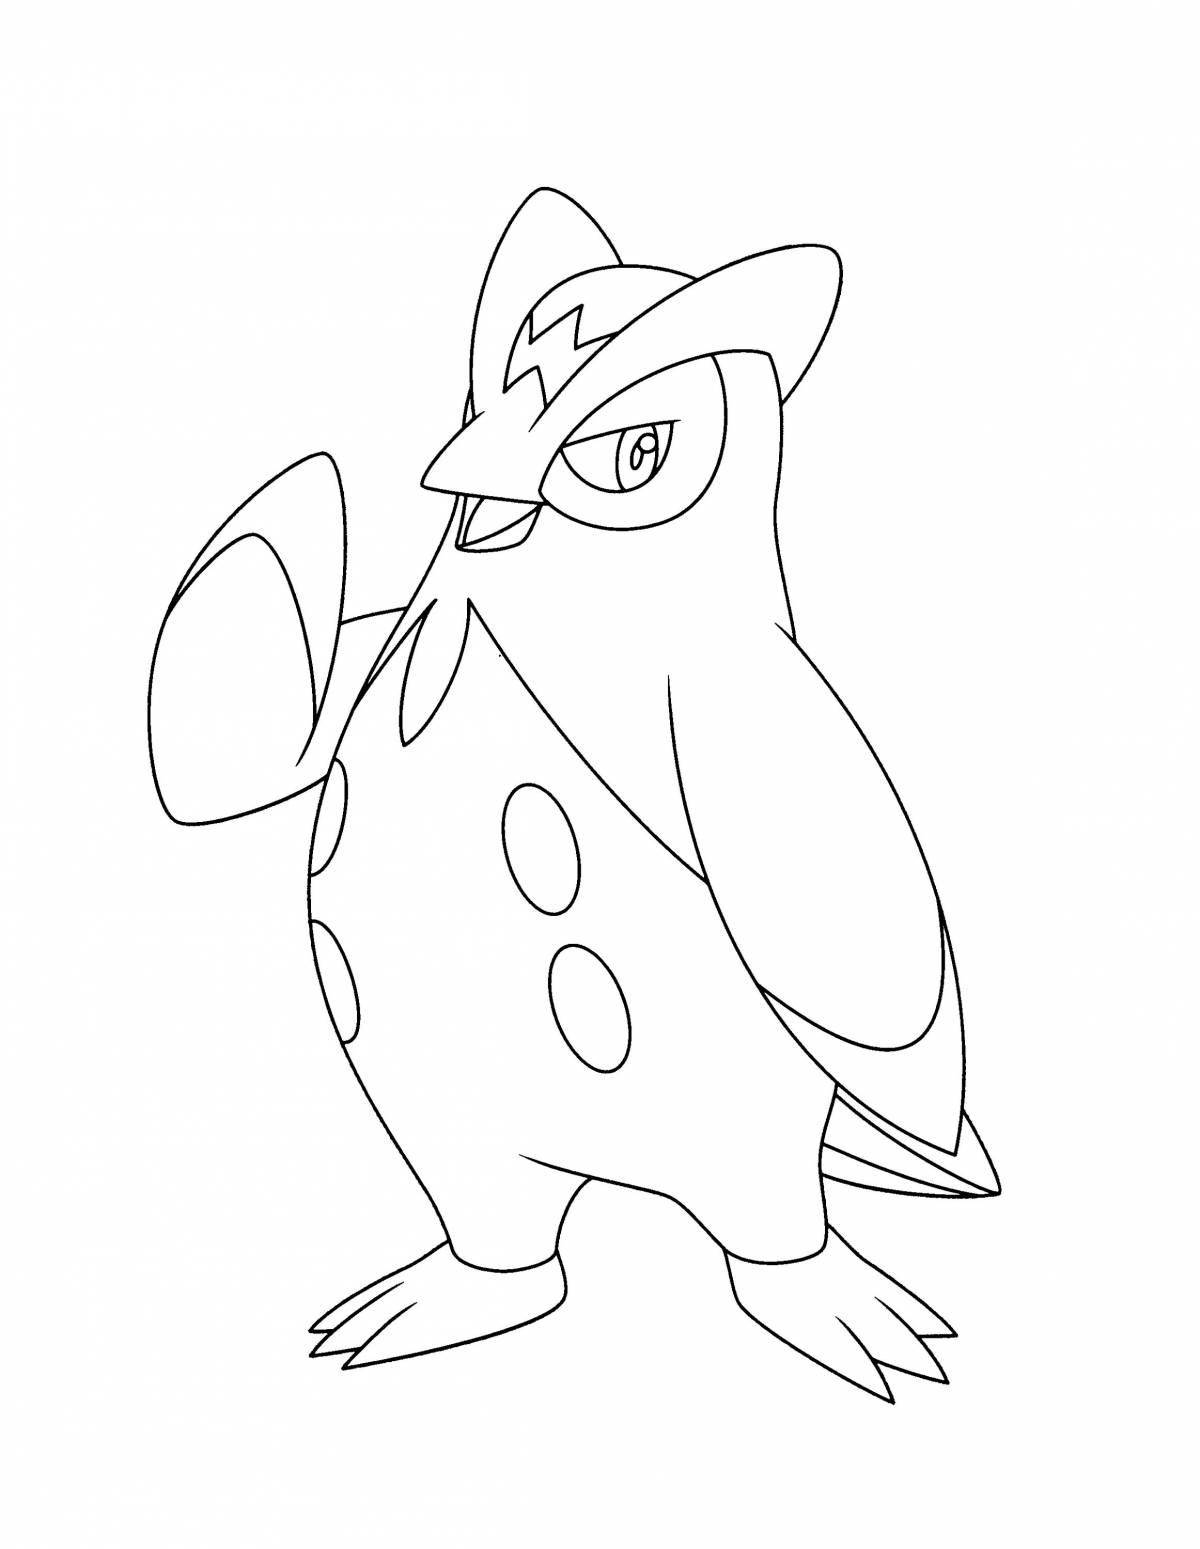 Awesome piplap pokemon coloring page